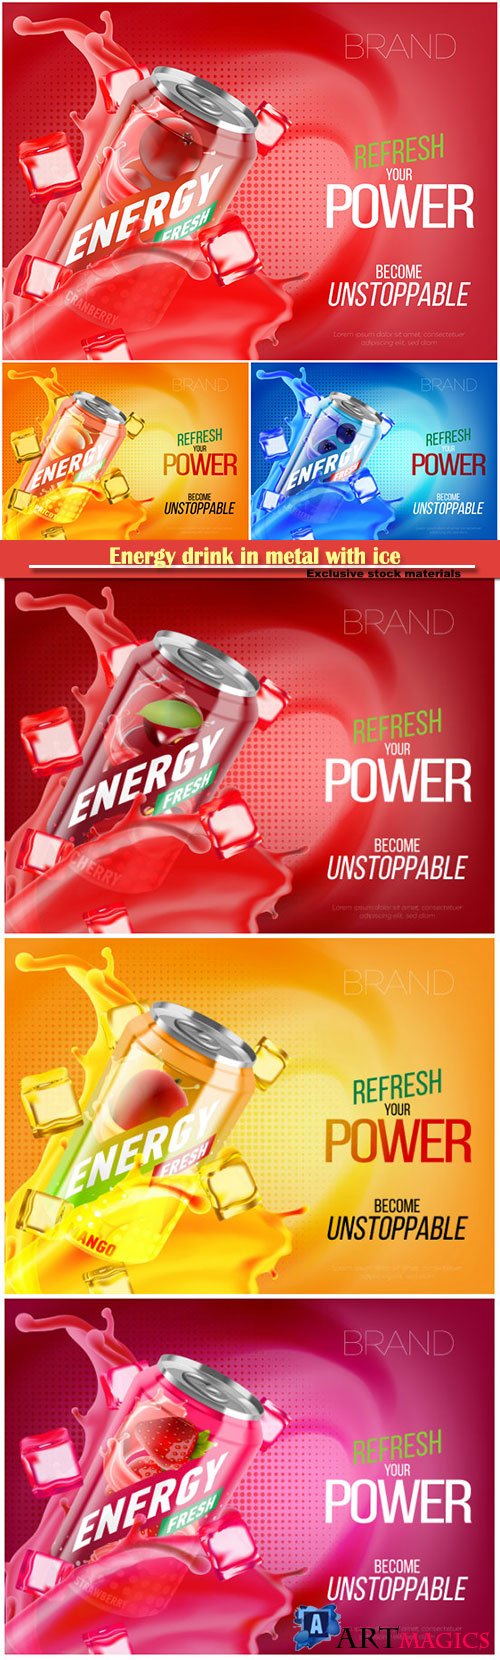 Energy drink in metal with ice and juice splash advertising vector banner